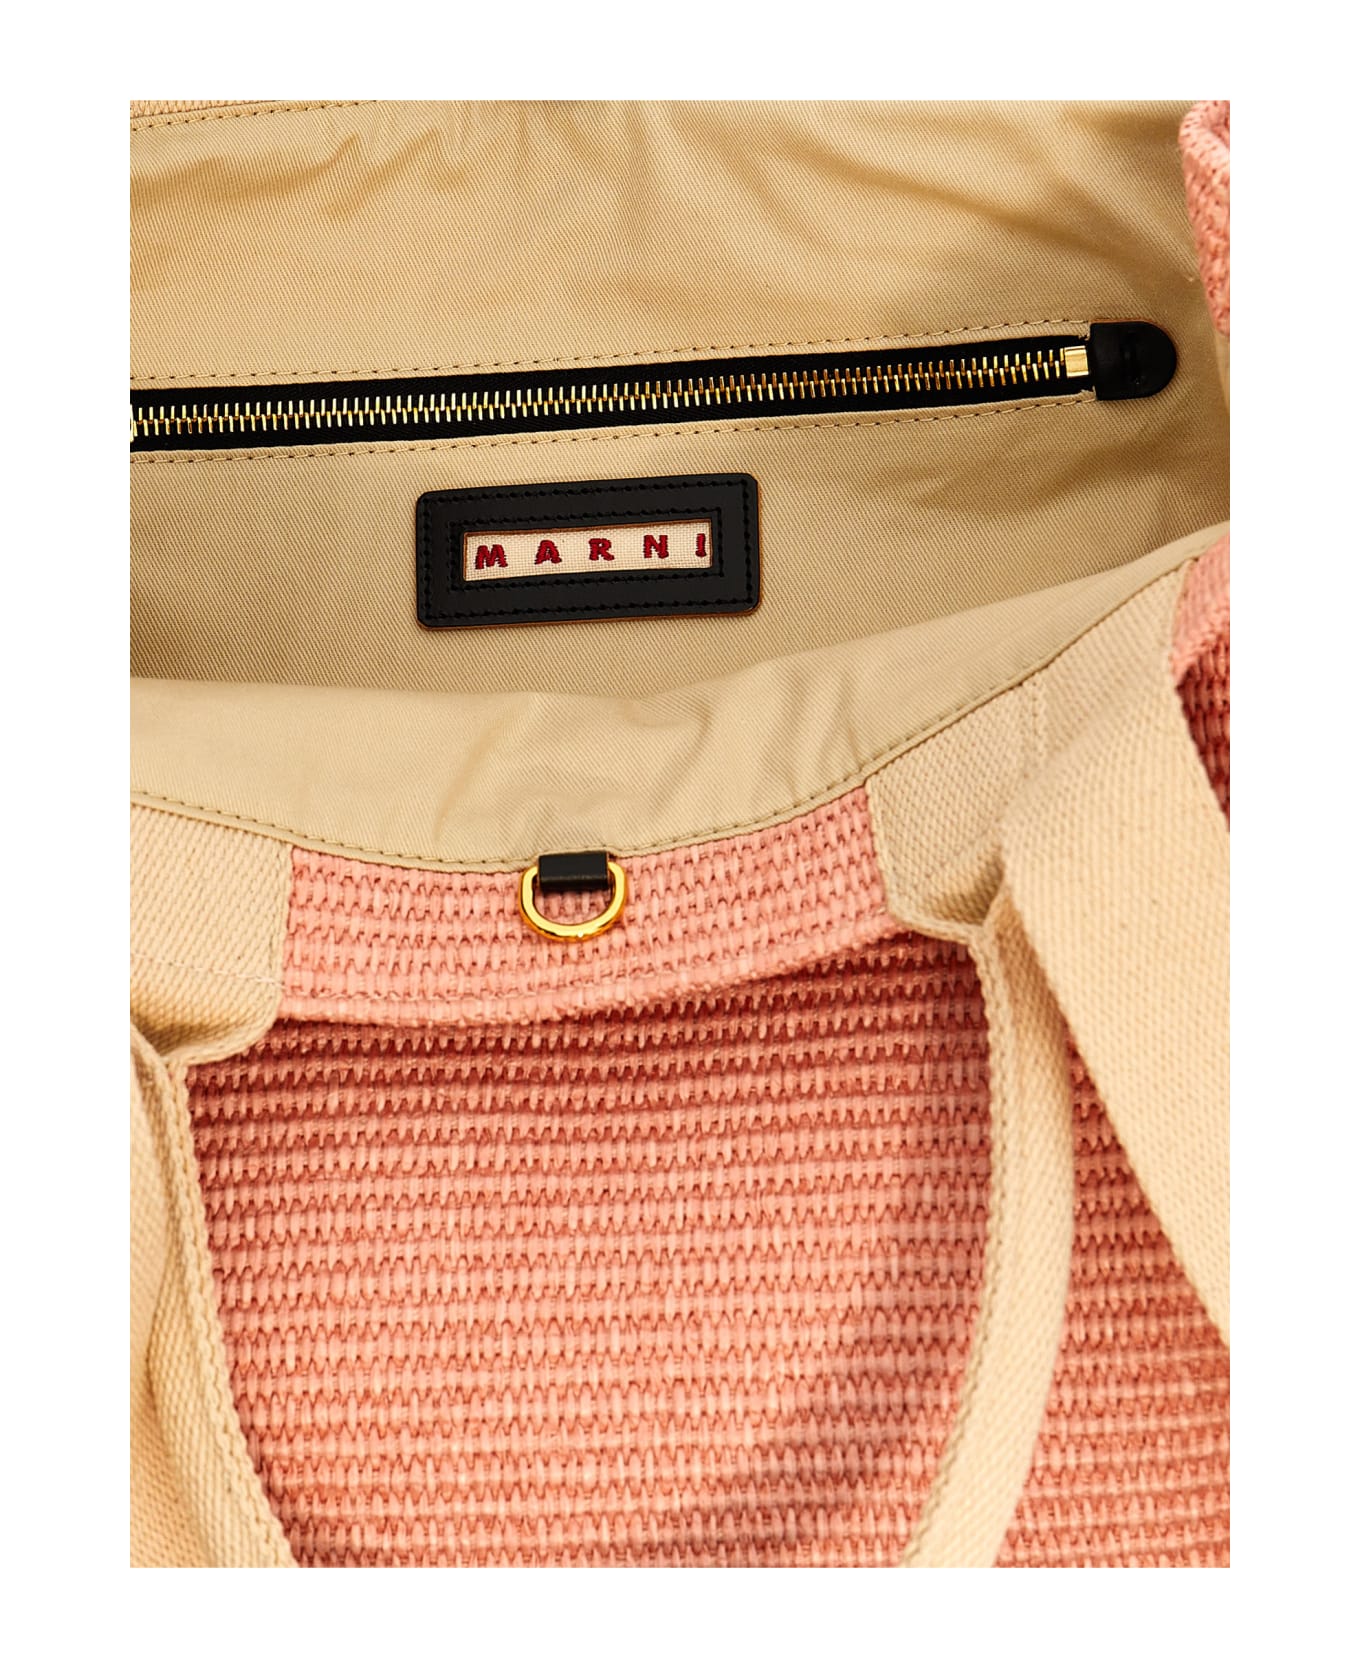 Marni 'east/west' Large Shopping Bag - Pink トートバッグ